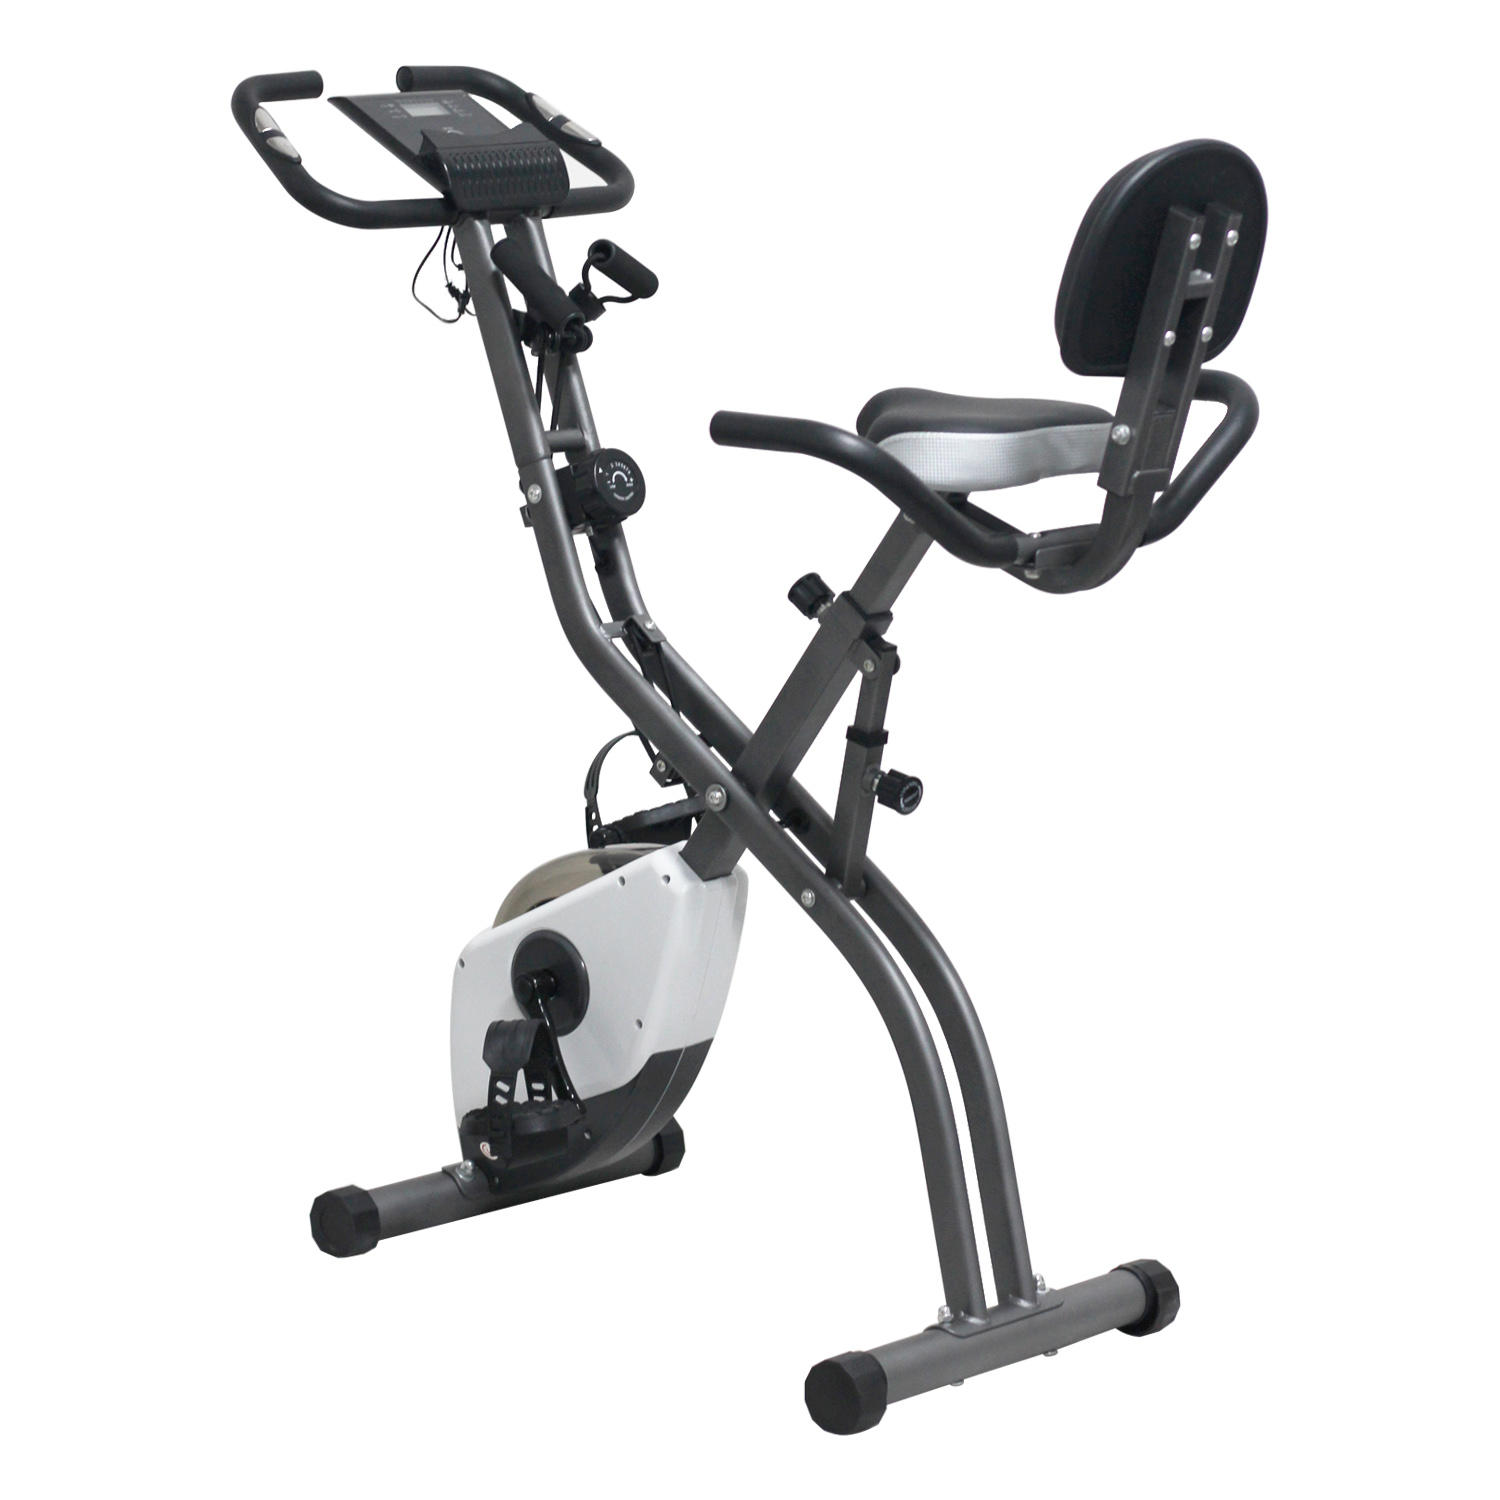 HY-B8021L Indoor 2-in-1 Fitness X-Bike: Redefining Home Workouts with Versatility and Efficiency